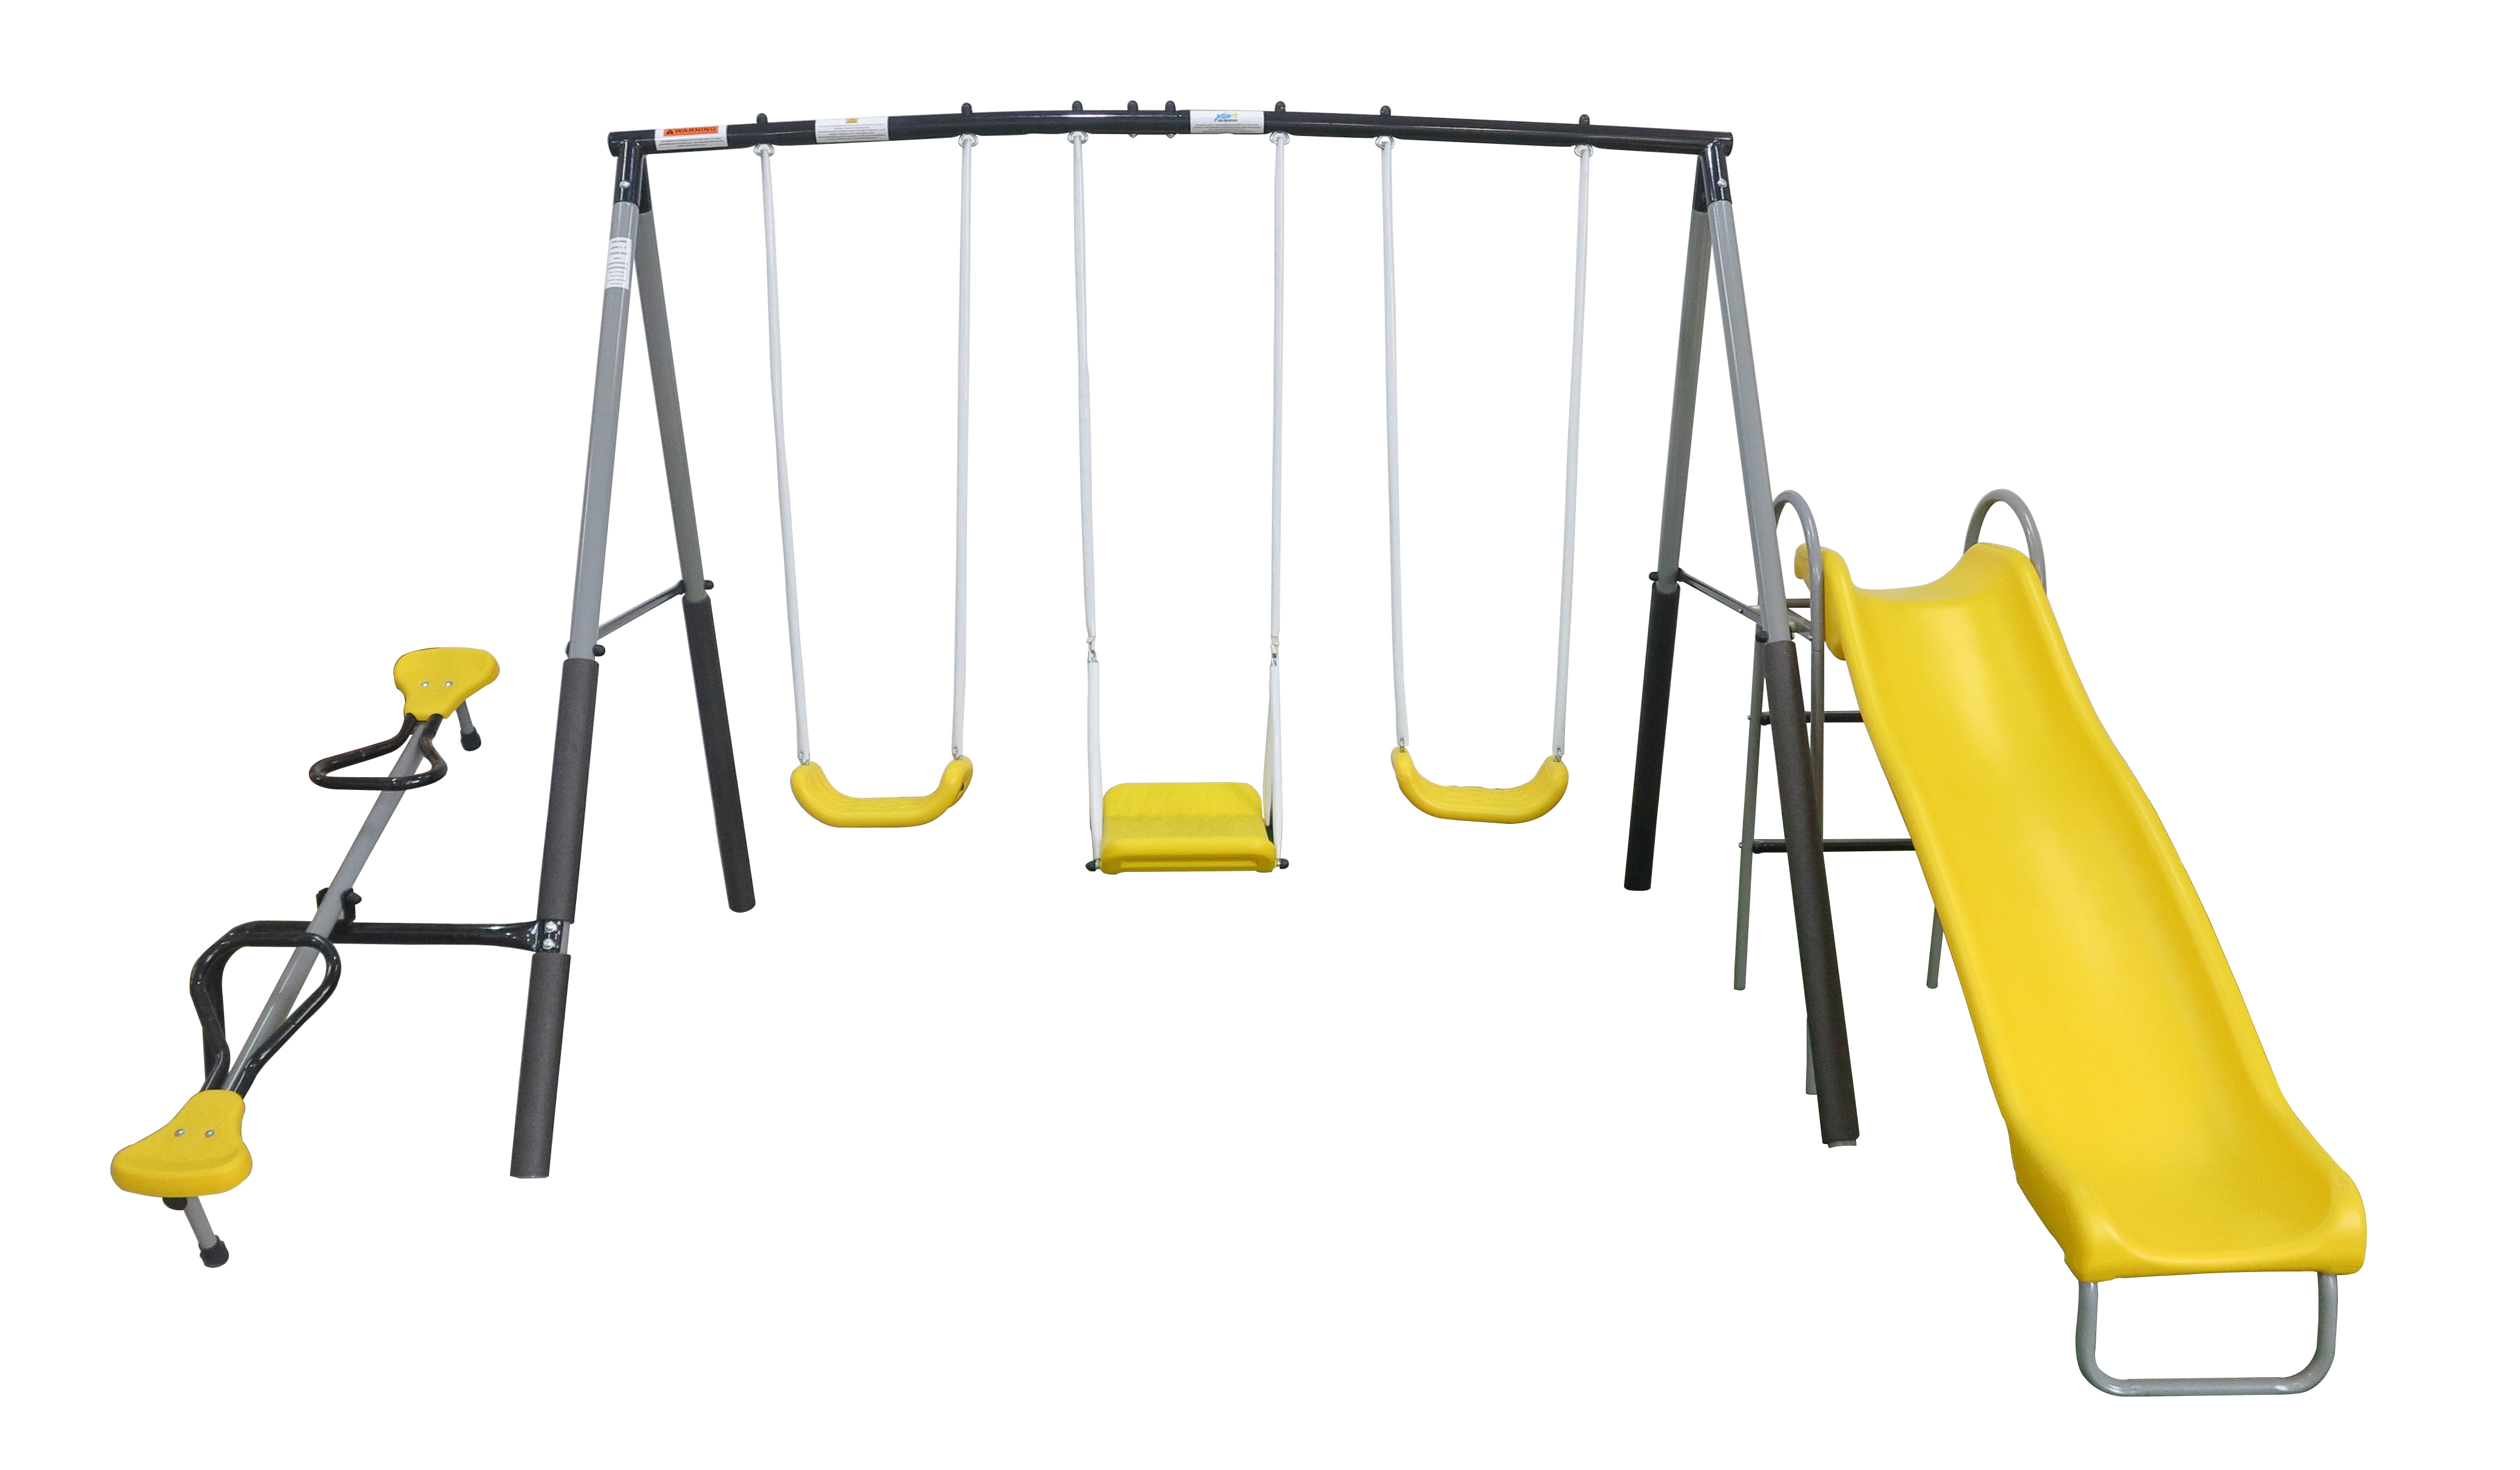 Swing-in Again Metal Swing Set by XDP Recreation with two Swing Seats, See-Saw, and Wave Slide - image 1 of 8